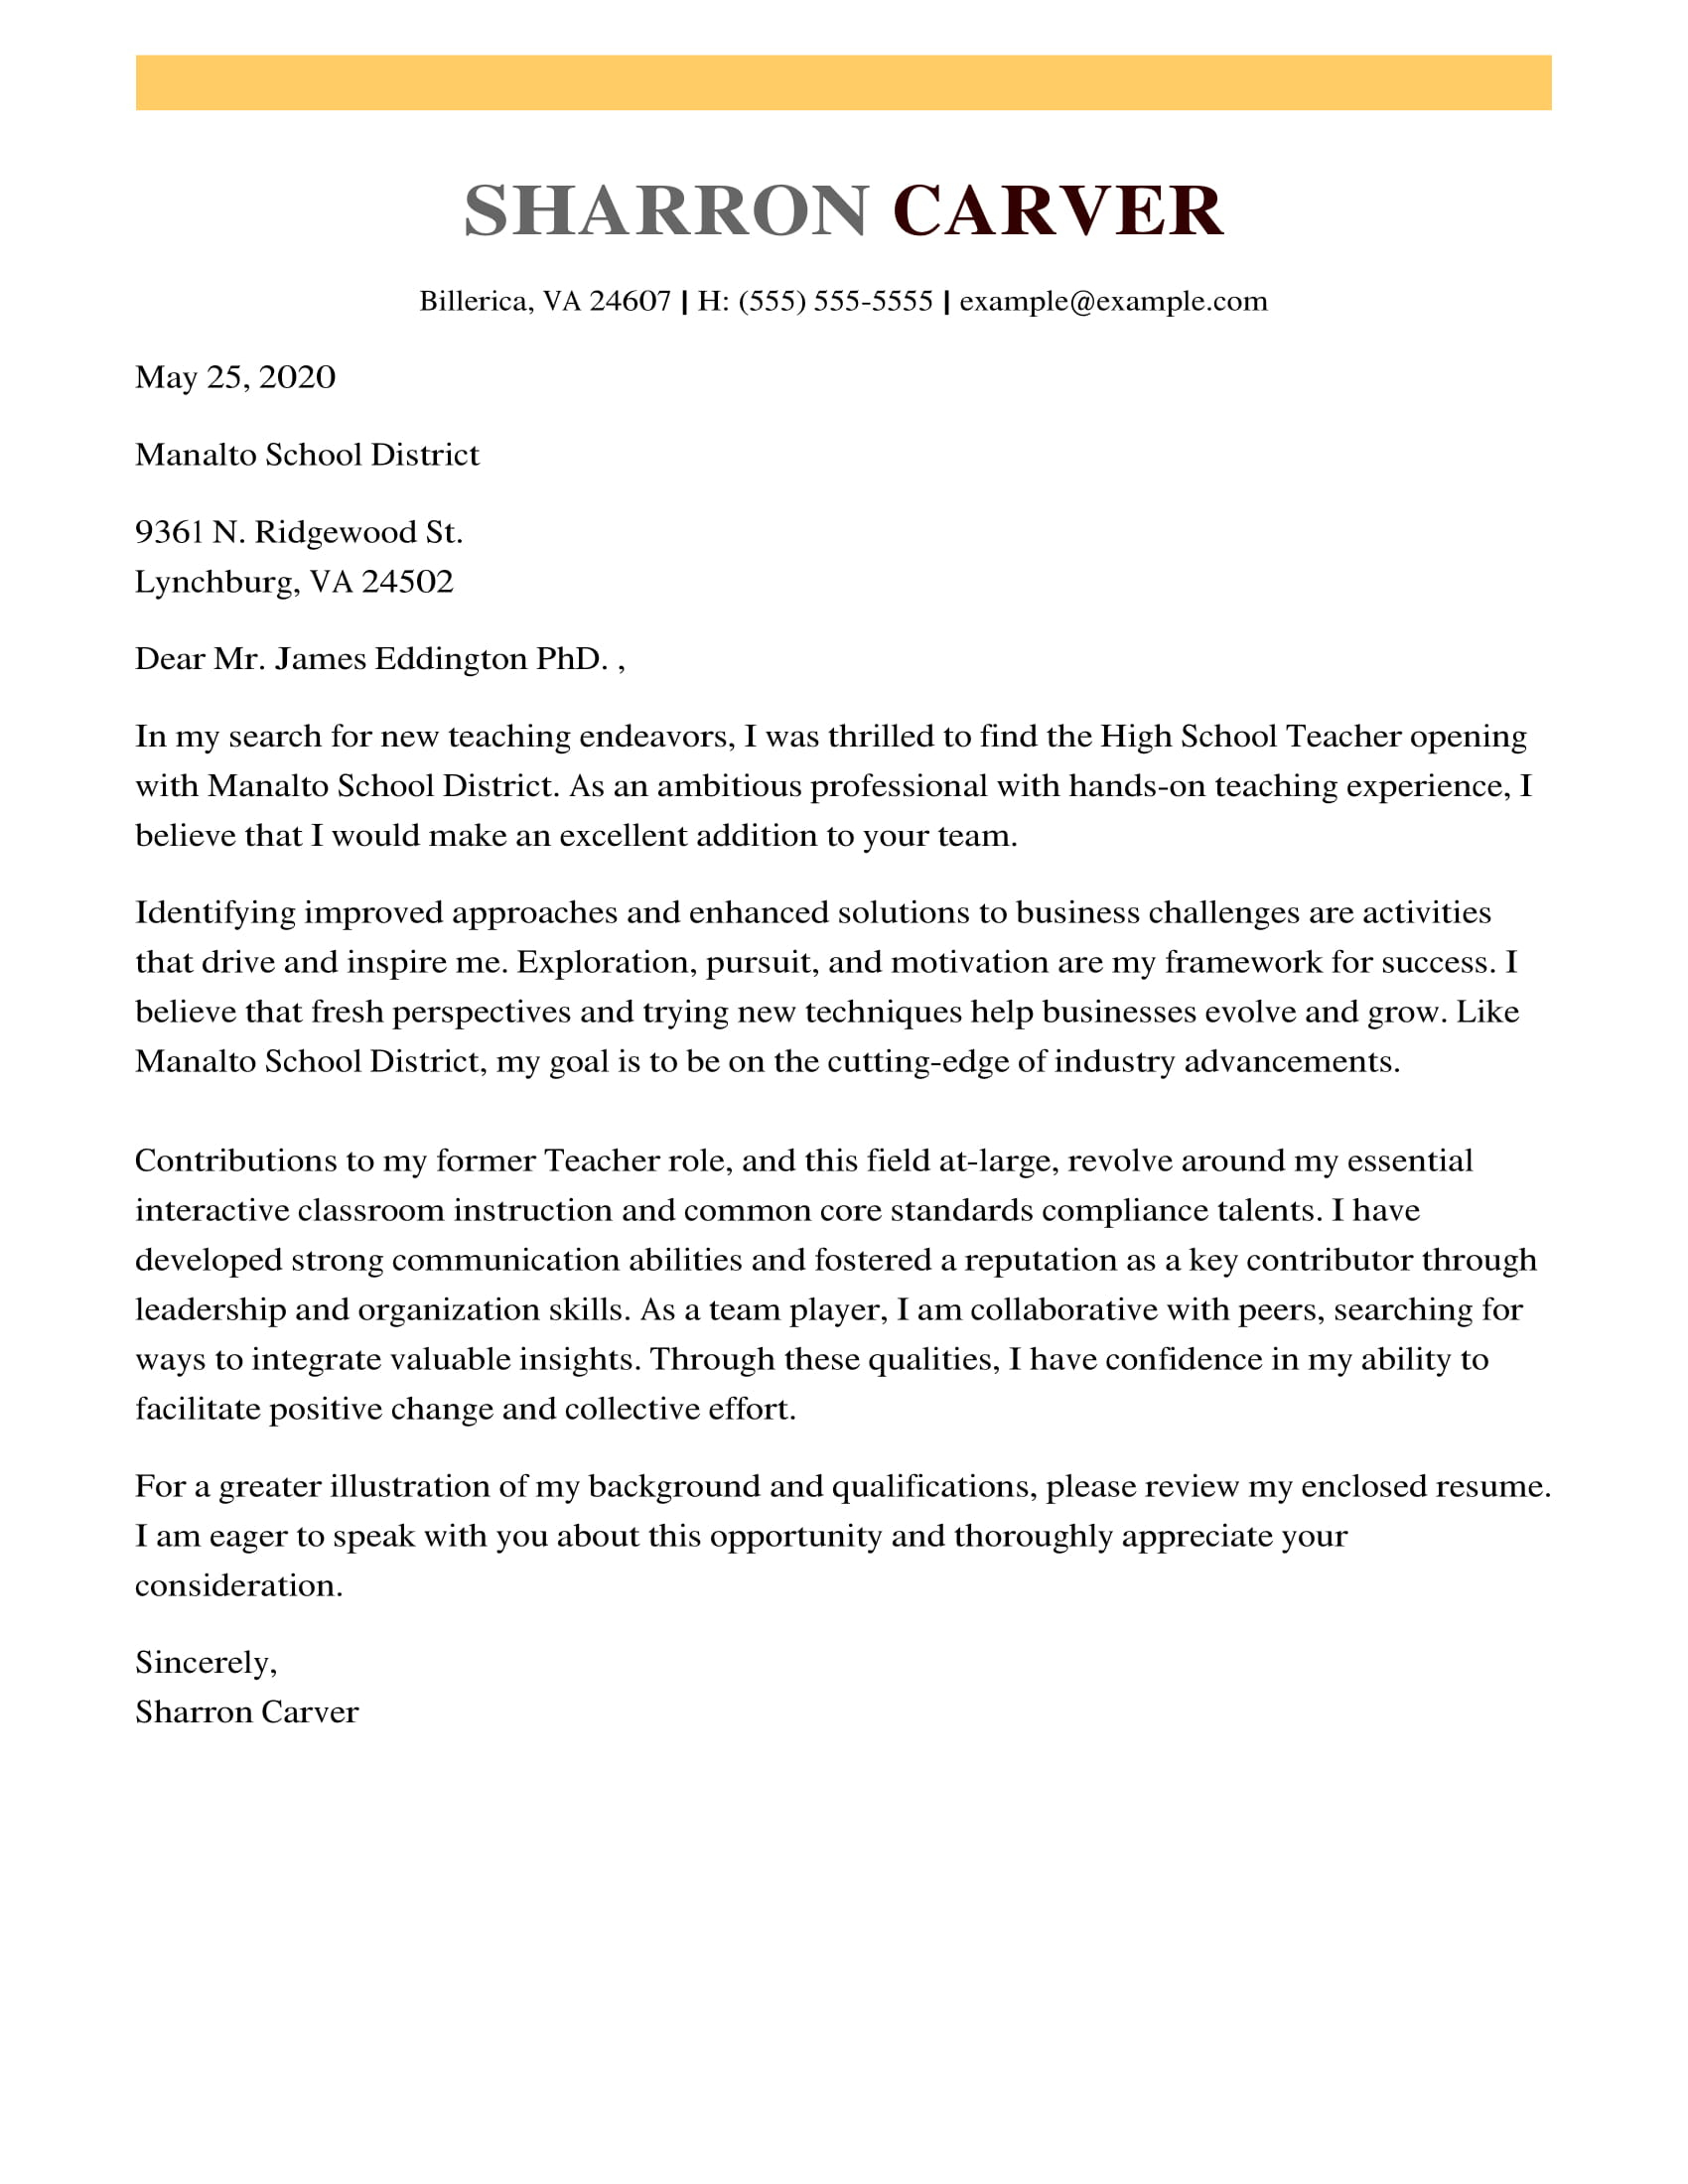 Cover Letter Formats Advice That Will Win You The Job for dimensions 1700 X 2200